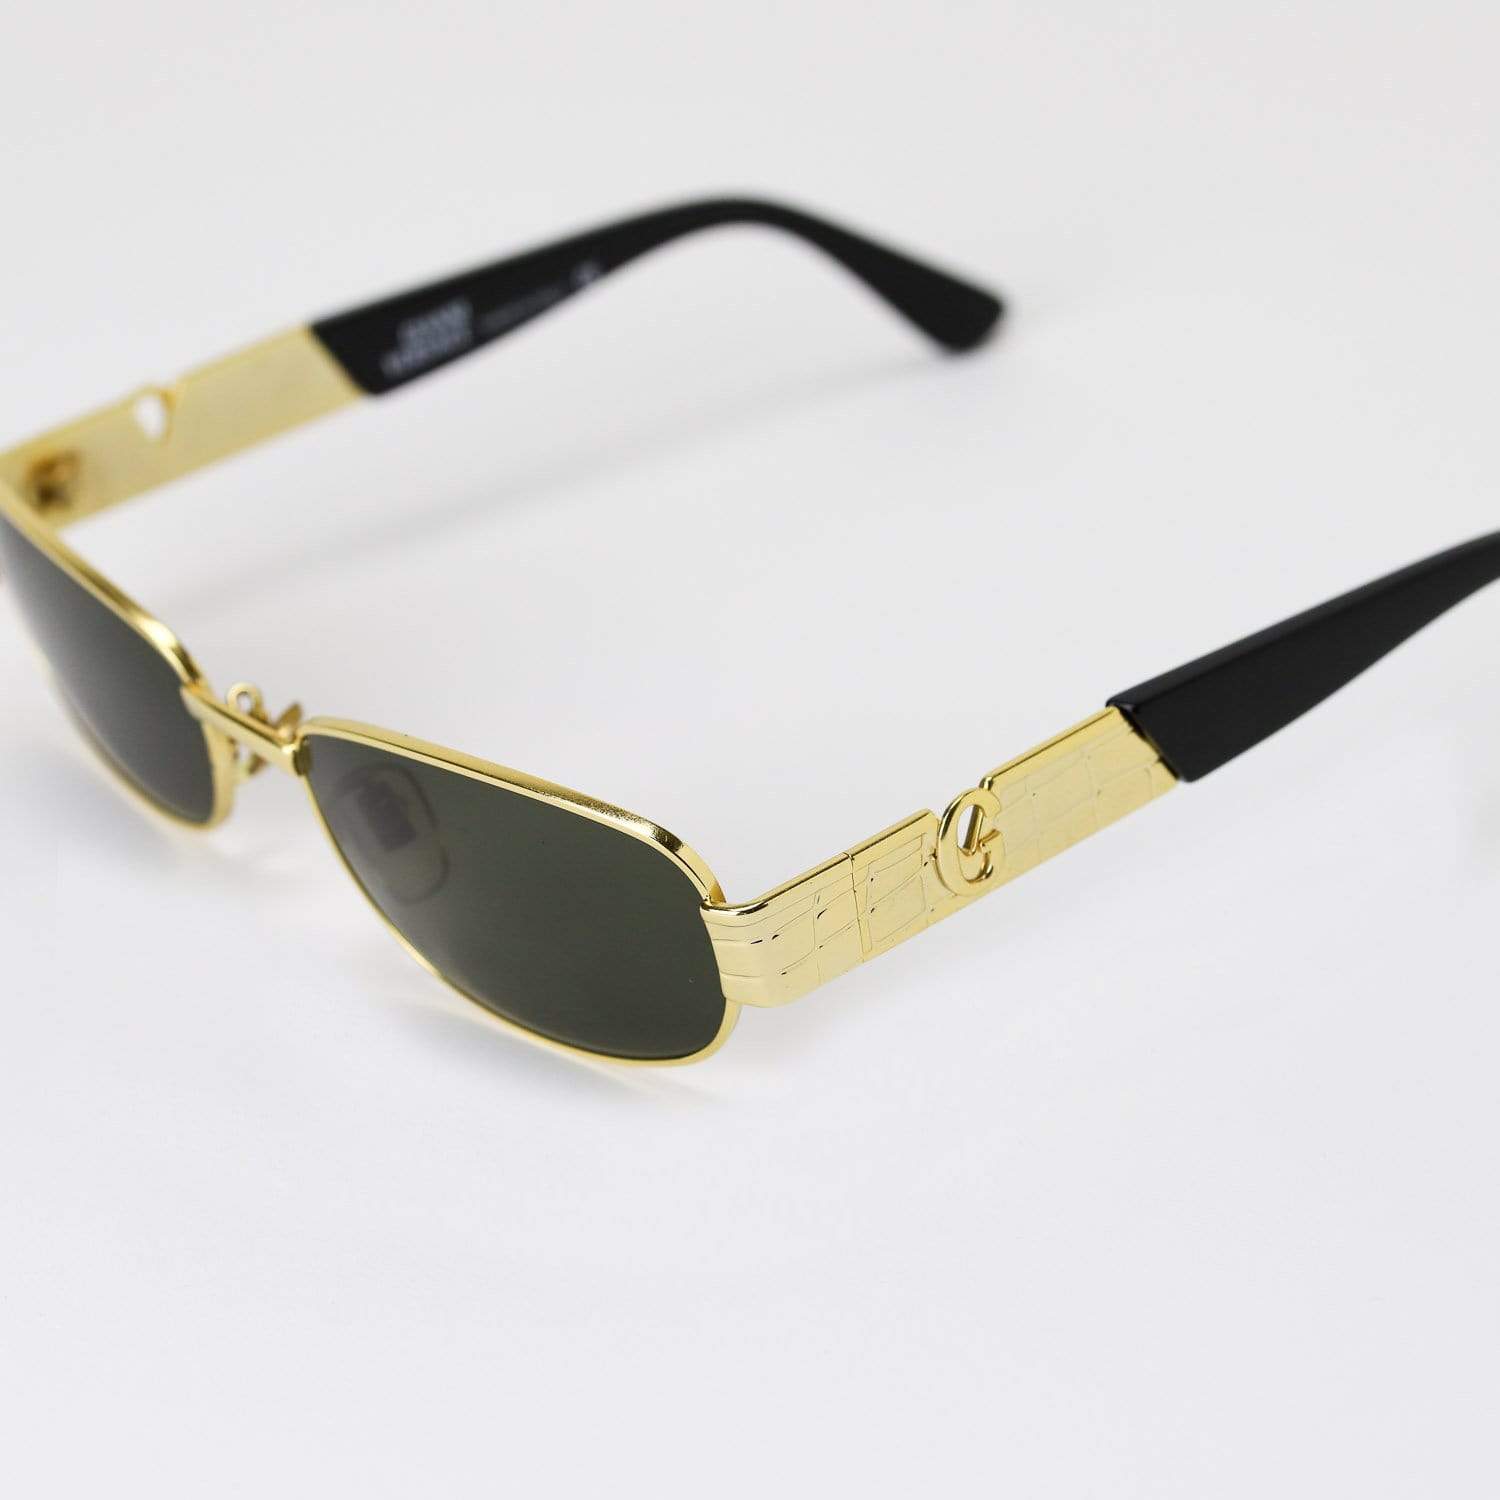 all gold versace glasses